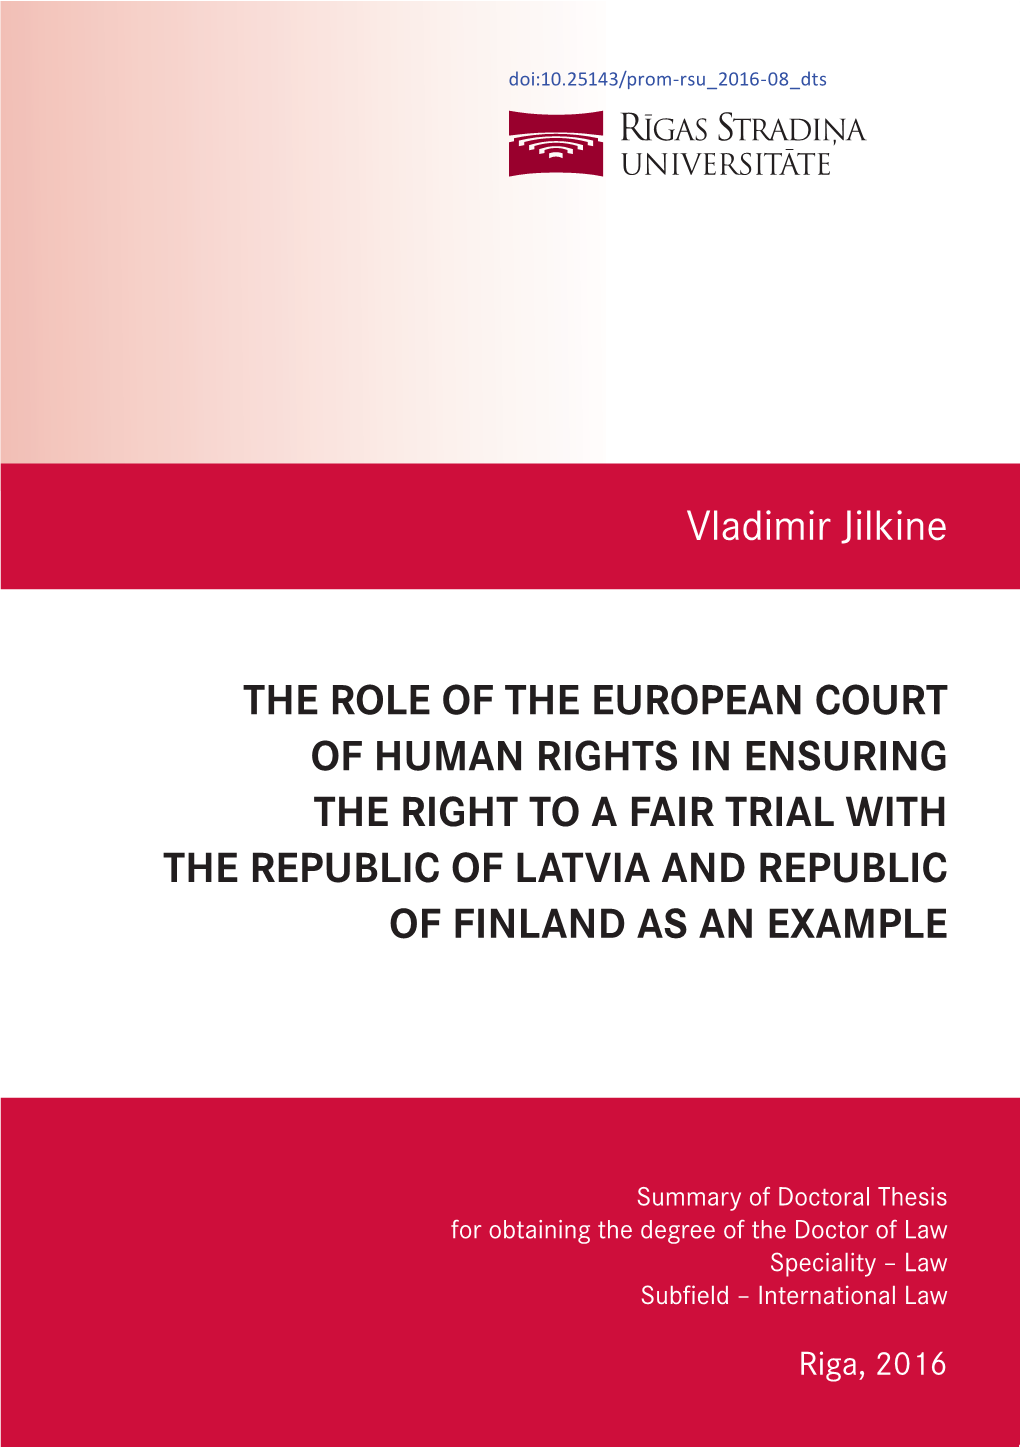 Vladimir Jilkine the ROLE of the EUROPEAN COURT of HUMAN